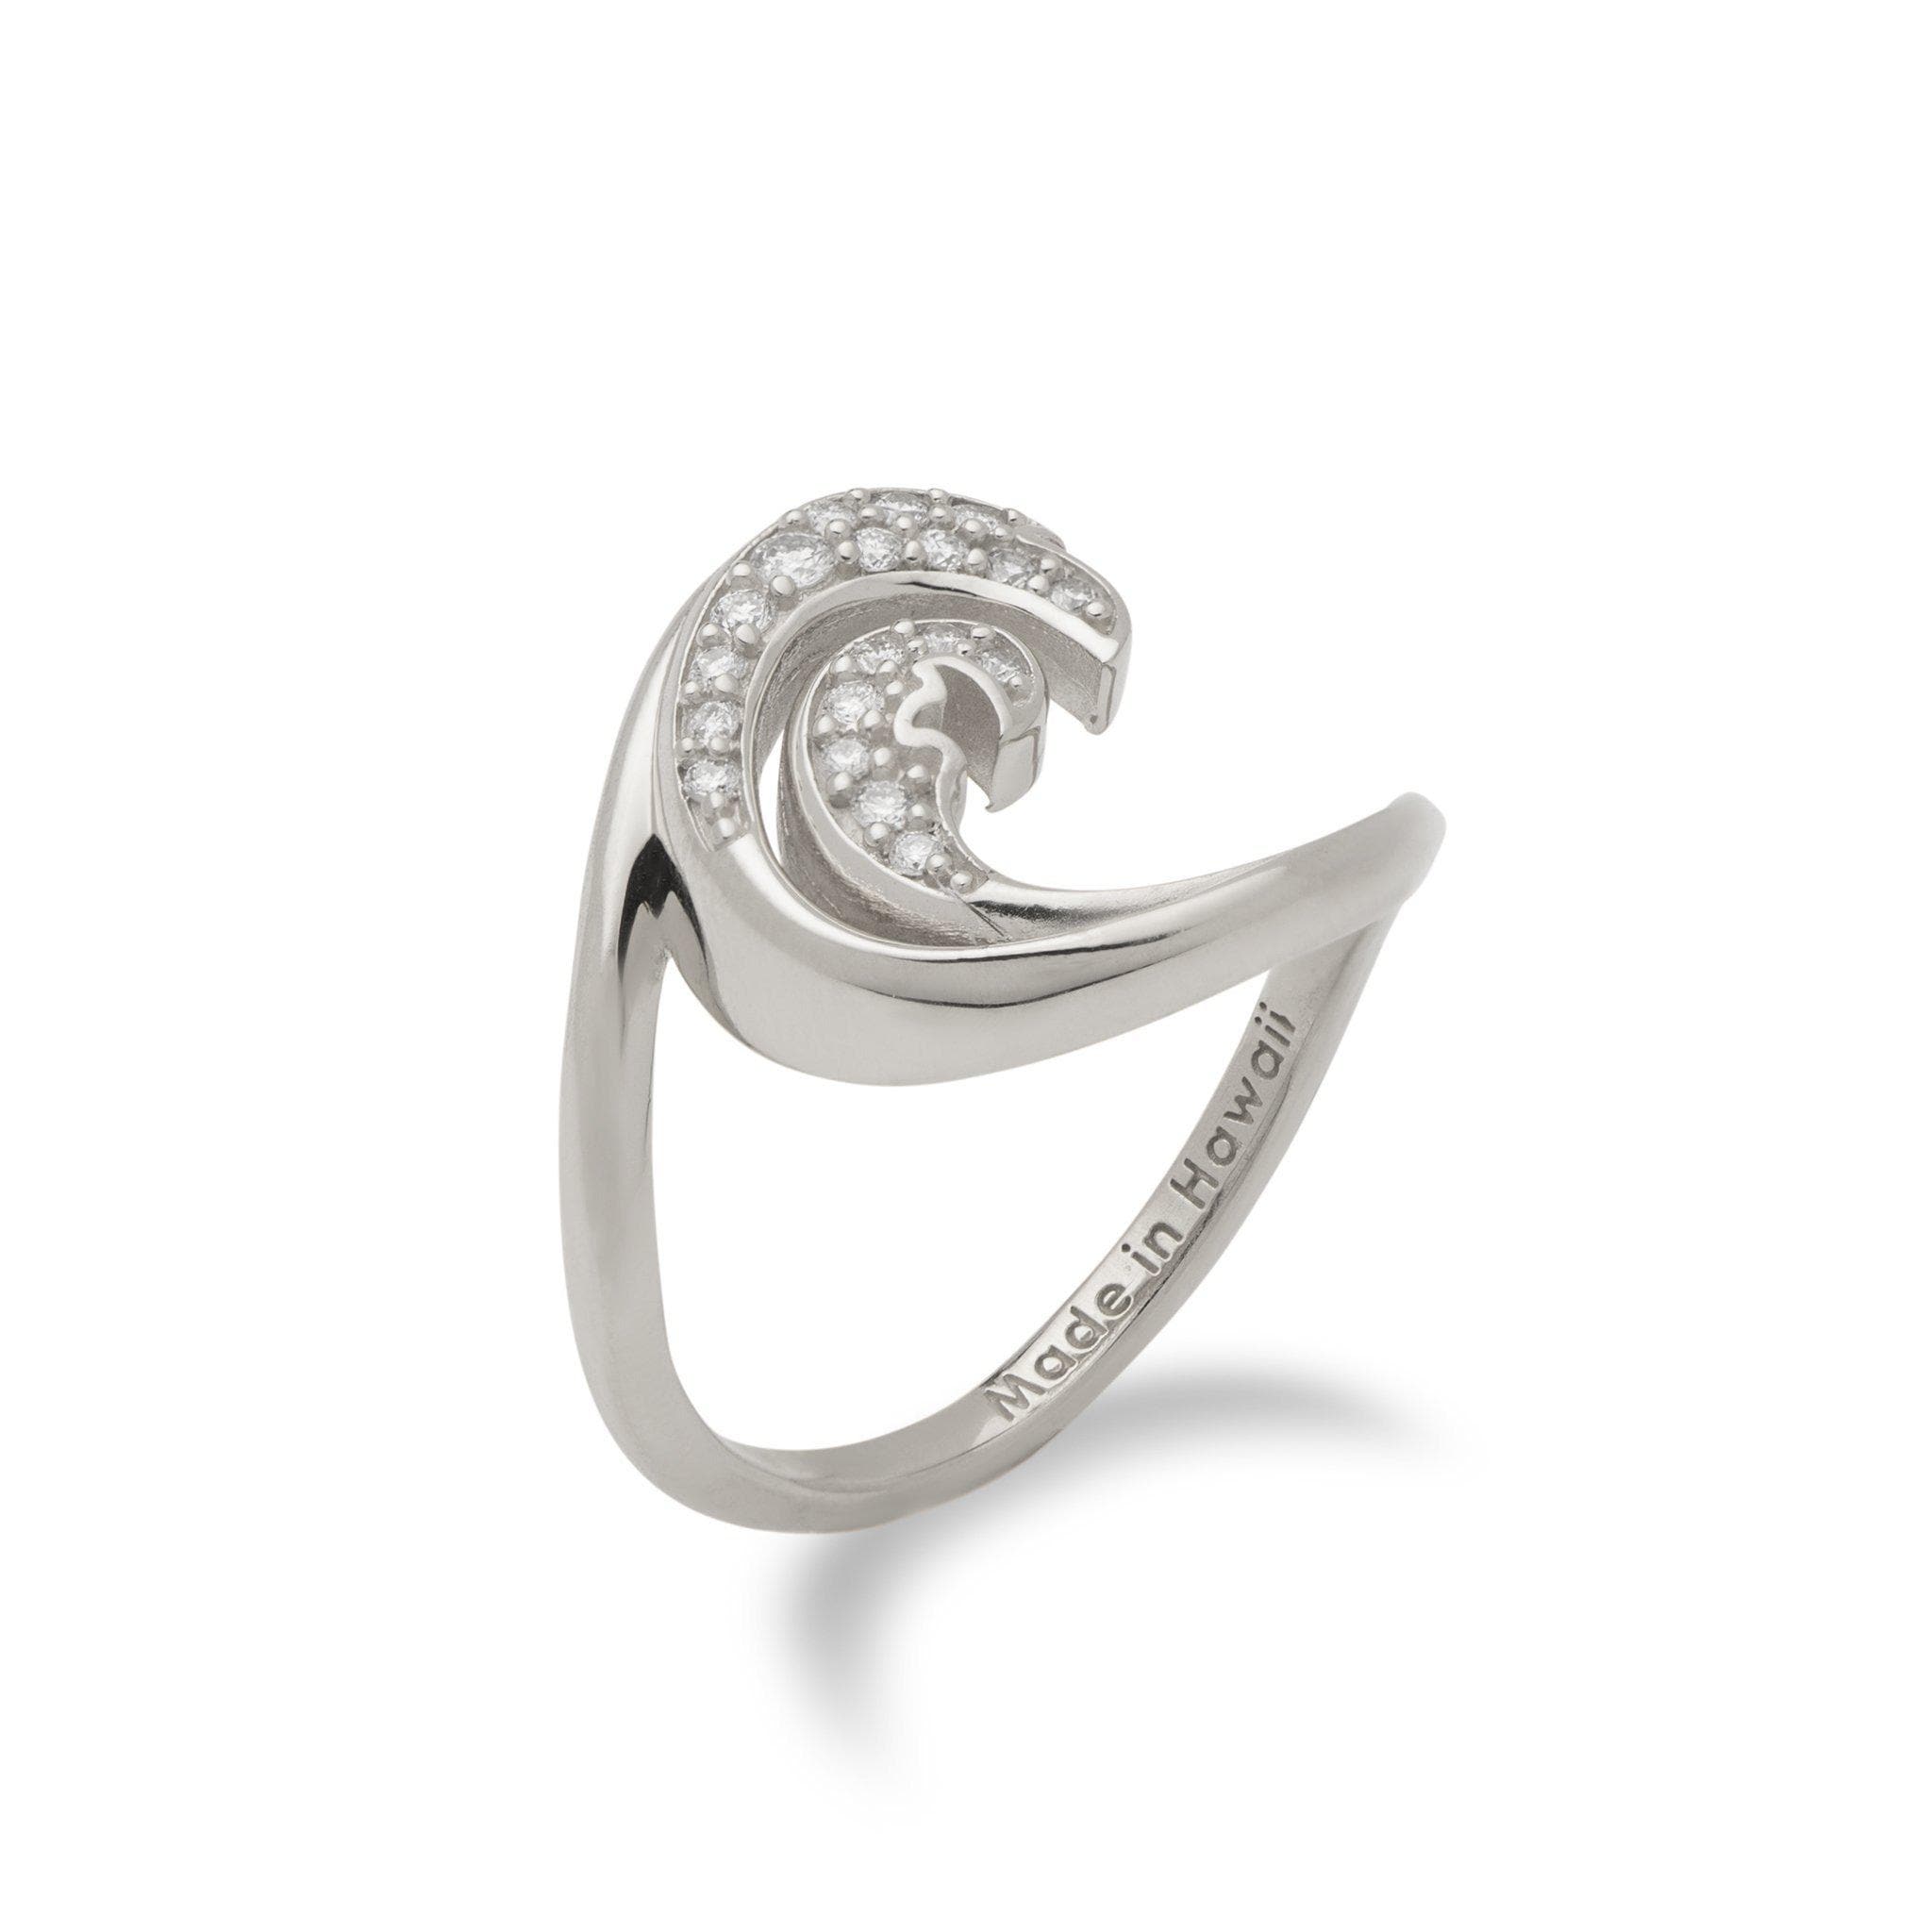 Nalu Ring in White Gold with Diamonds - 15mm